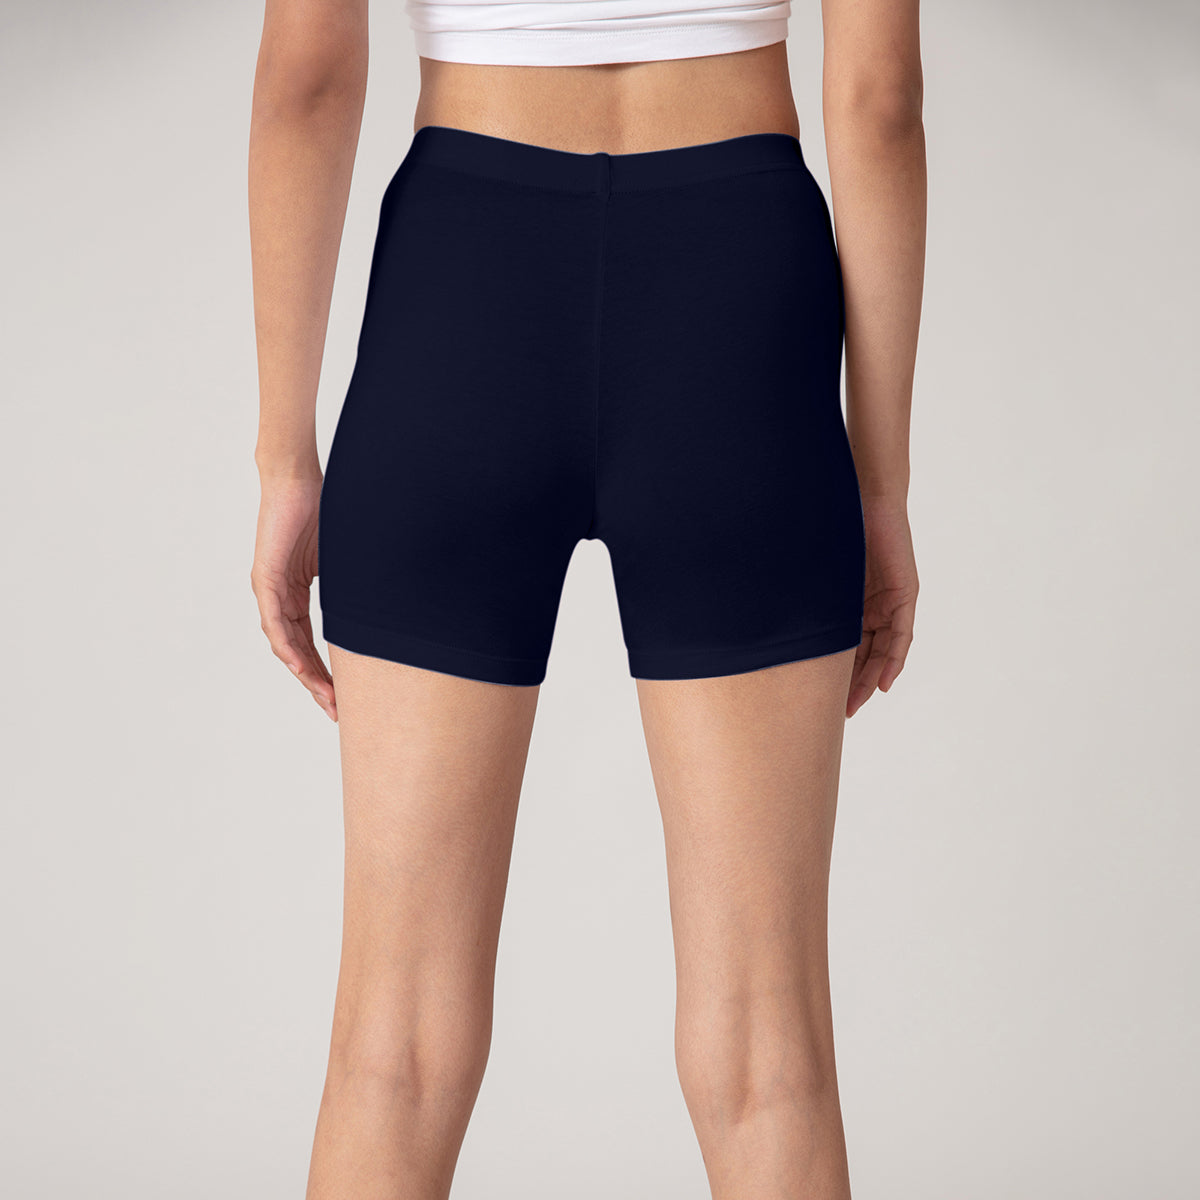 Nykd by Nykaa Pack of 2 Stretch Cotton Cycling Shorts-NYP083 Peacot & Skin